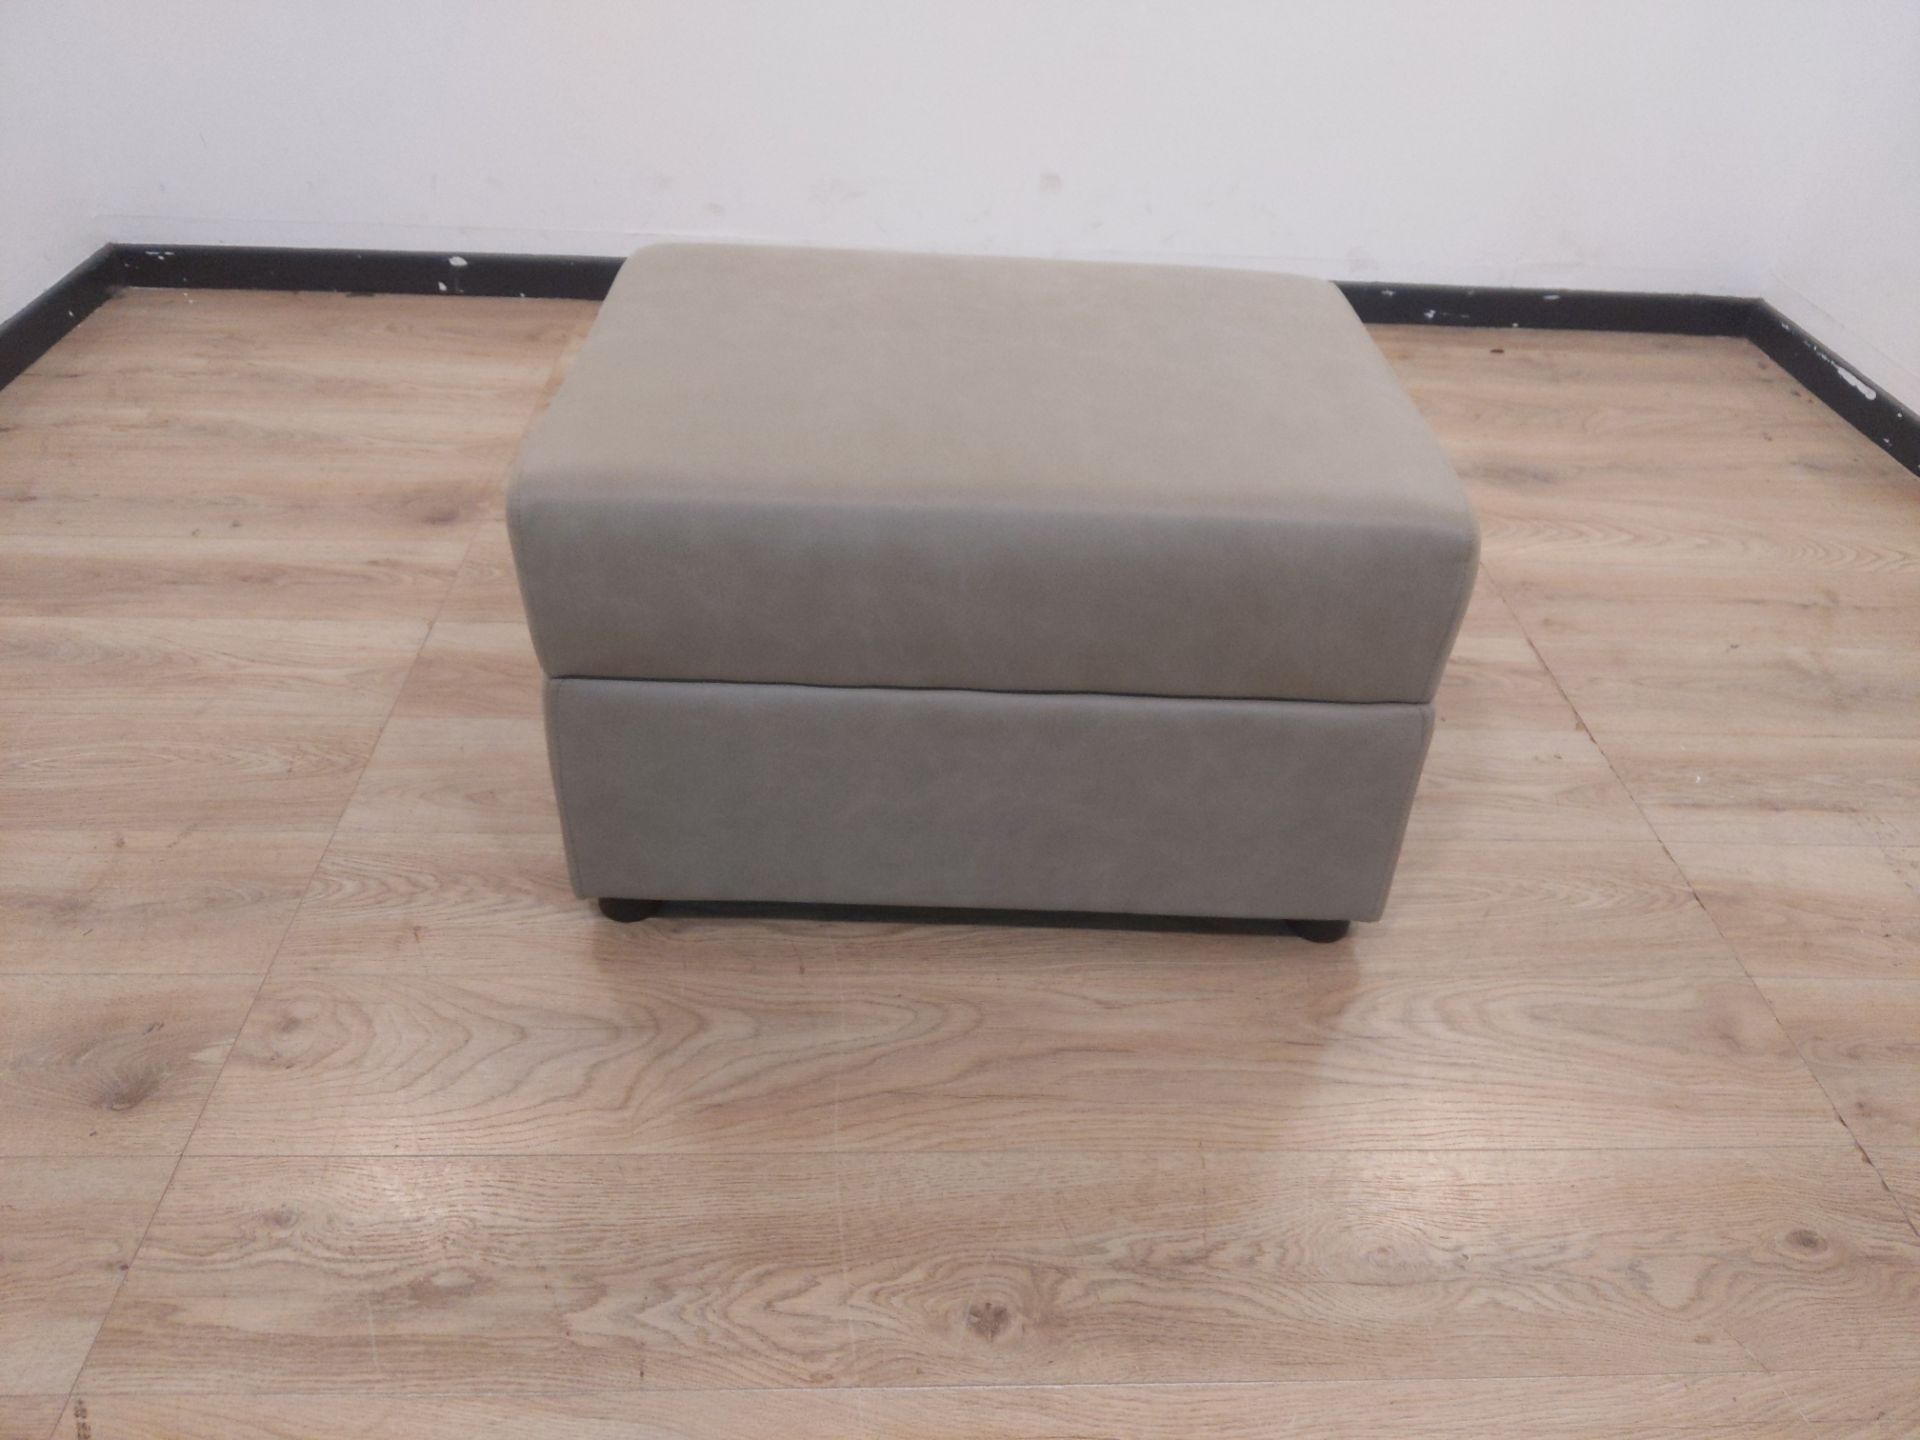 Roman Storage Footstool Pisa Taupe Self Stitch Black Glides RRP 300About the Product(s)Roman Storage